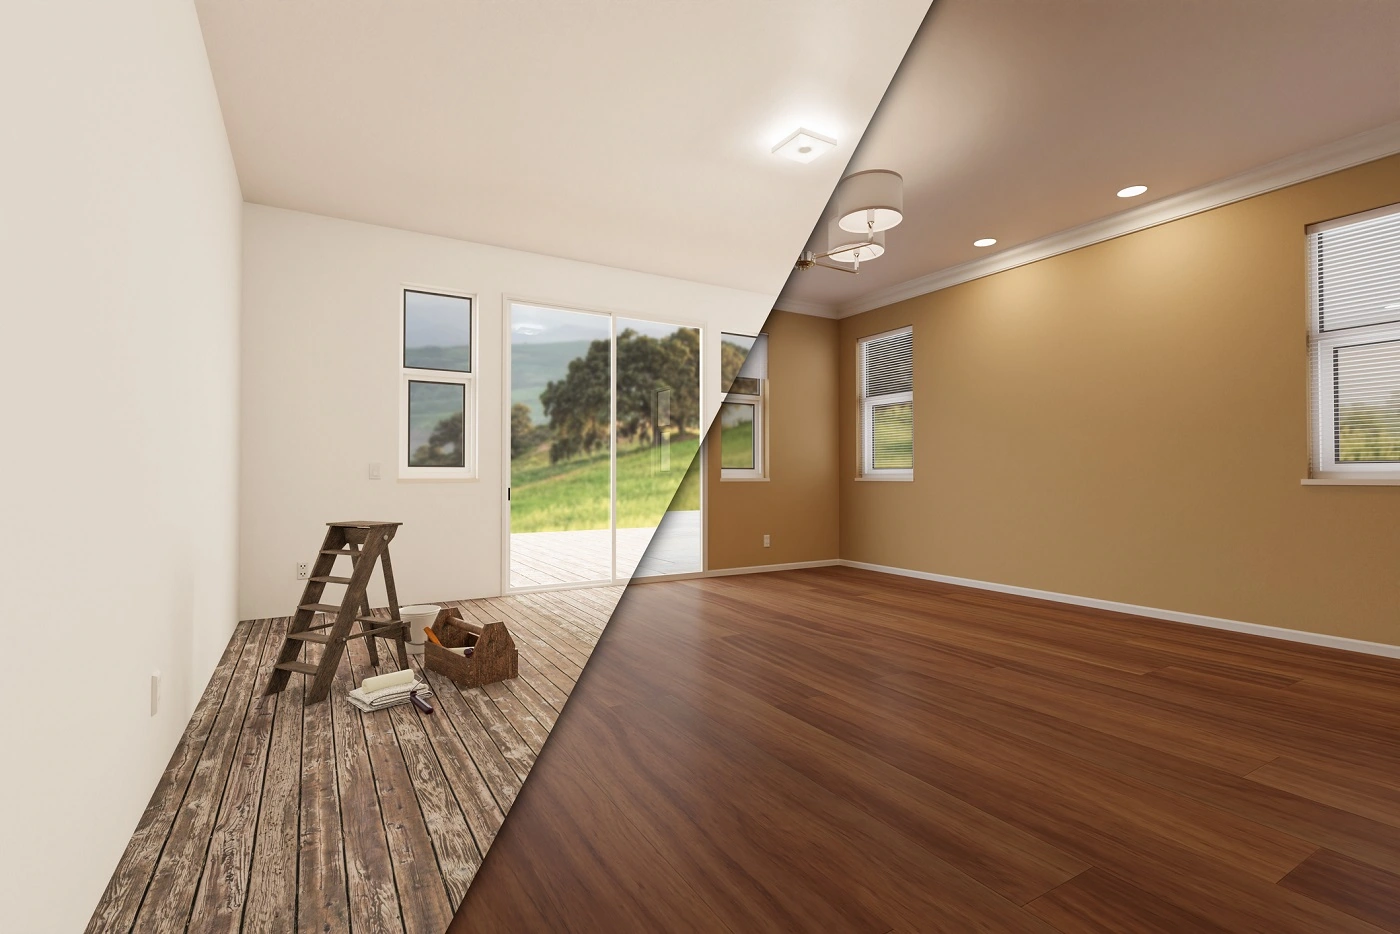 Floor Remodeling with Flooring Outlet & More In San Jose